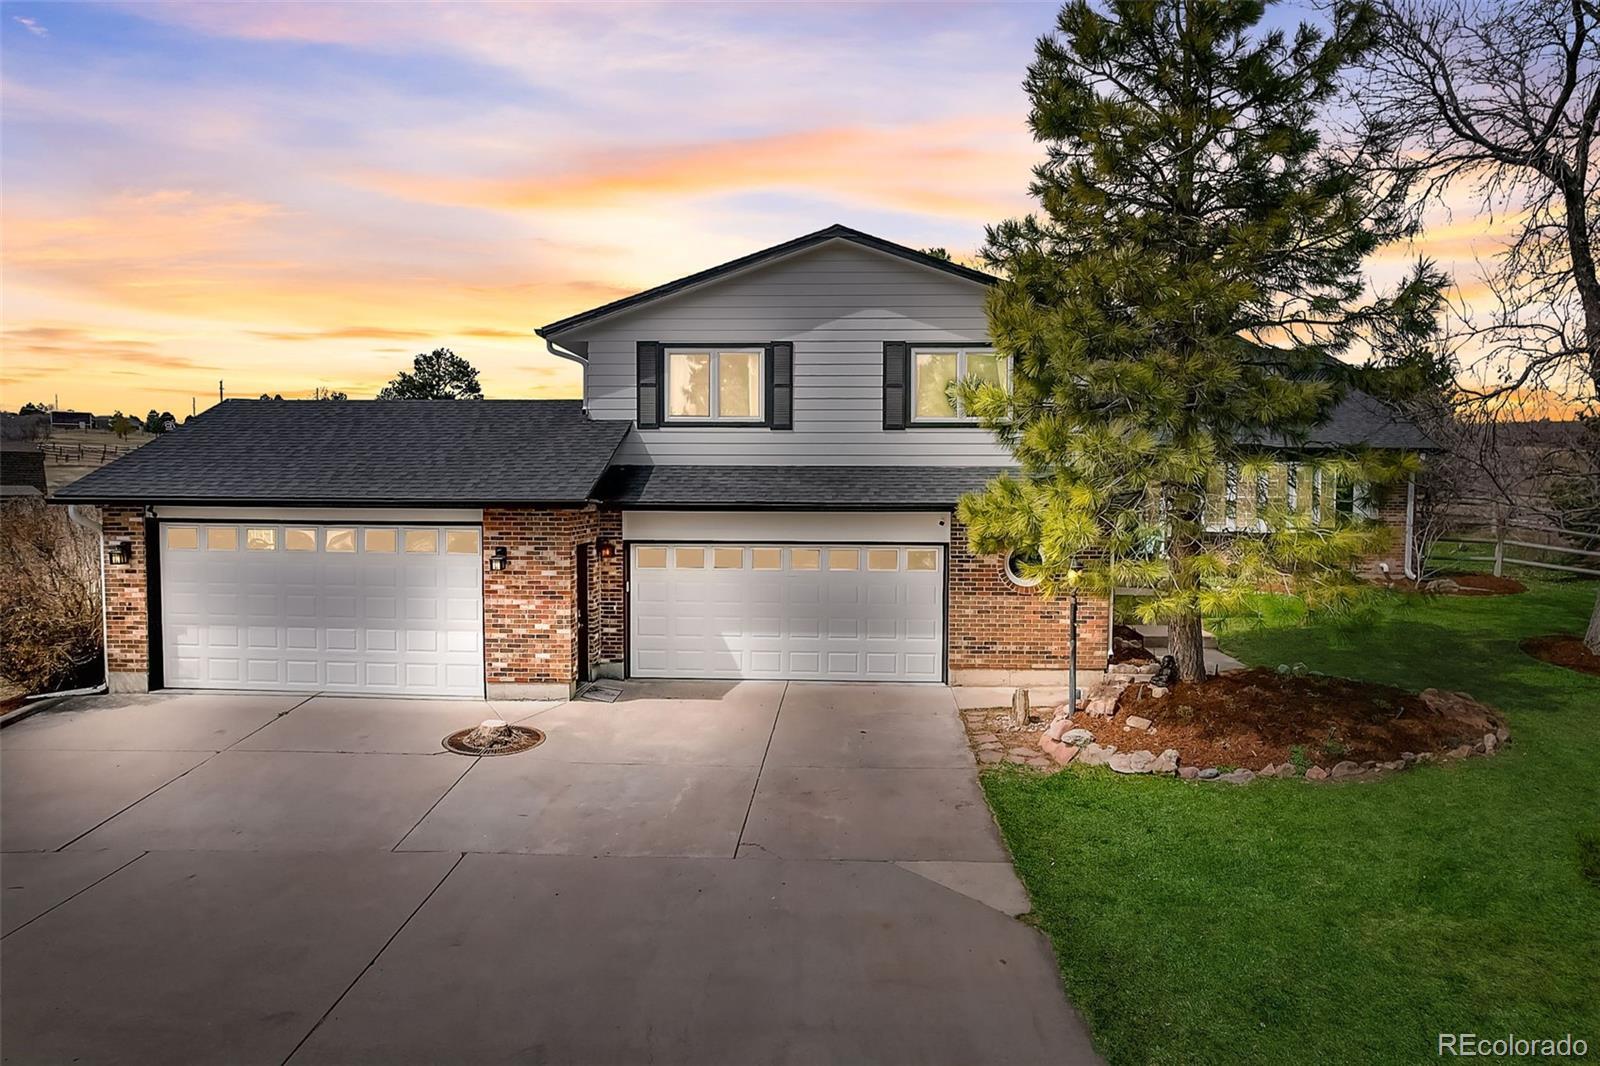 Photo one of 9241 N Palomino Dr Castle Rock CO 80108 | MLS 3459111